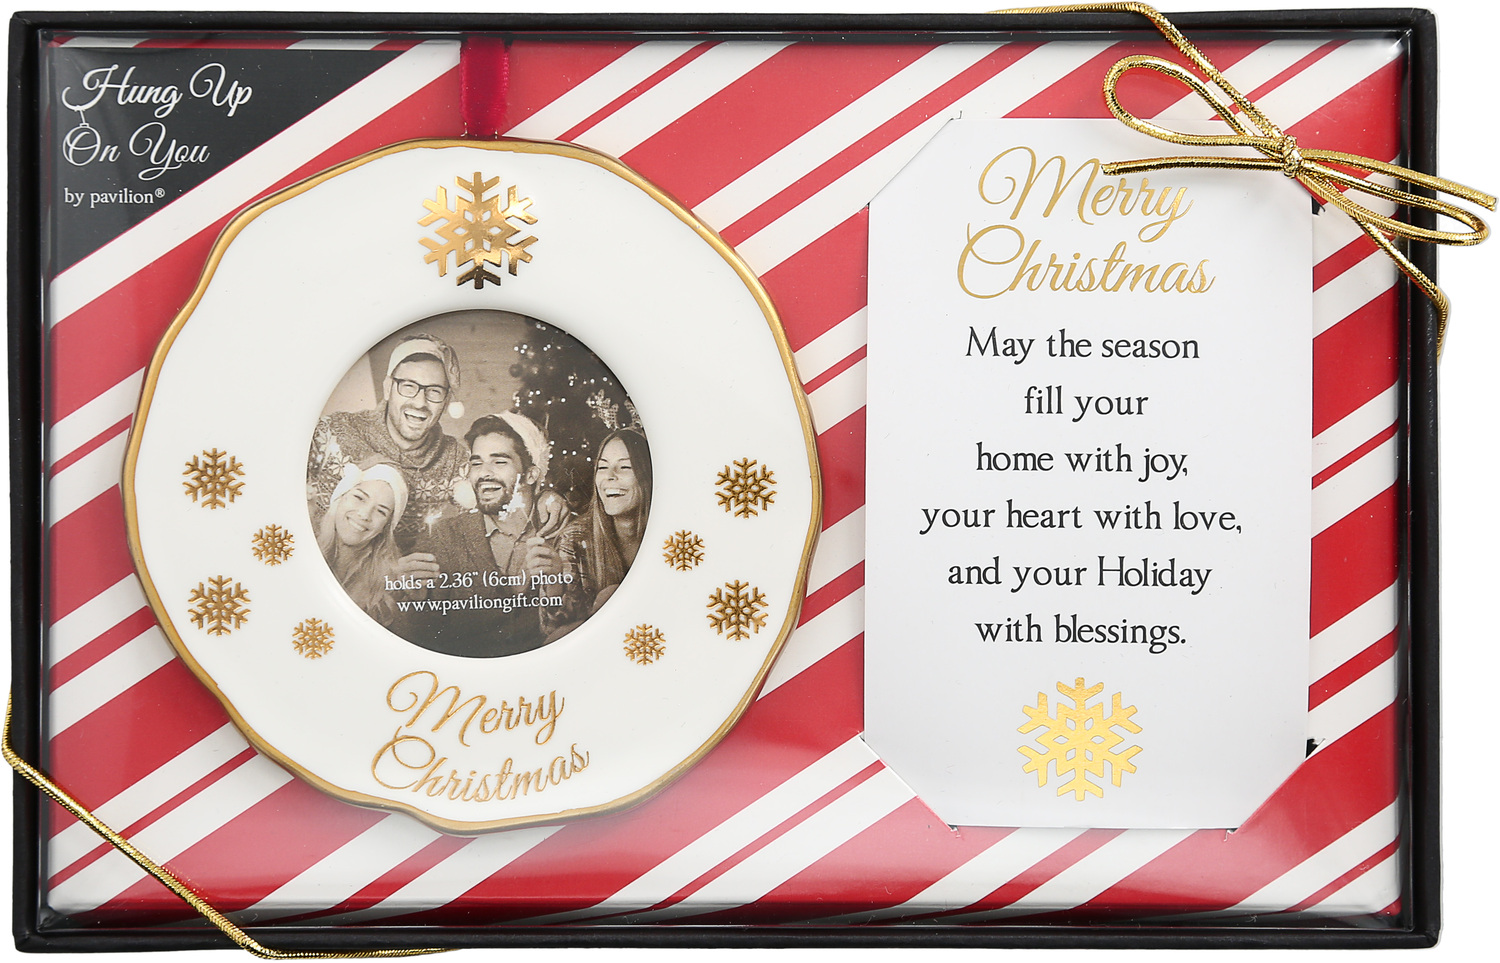 Merry Christmas by Hung Up on You - Merry Christmas - 4" Photo Frame Ornament
